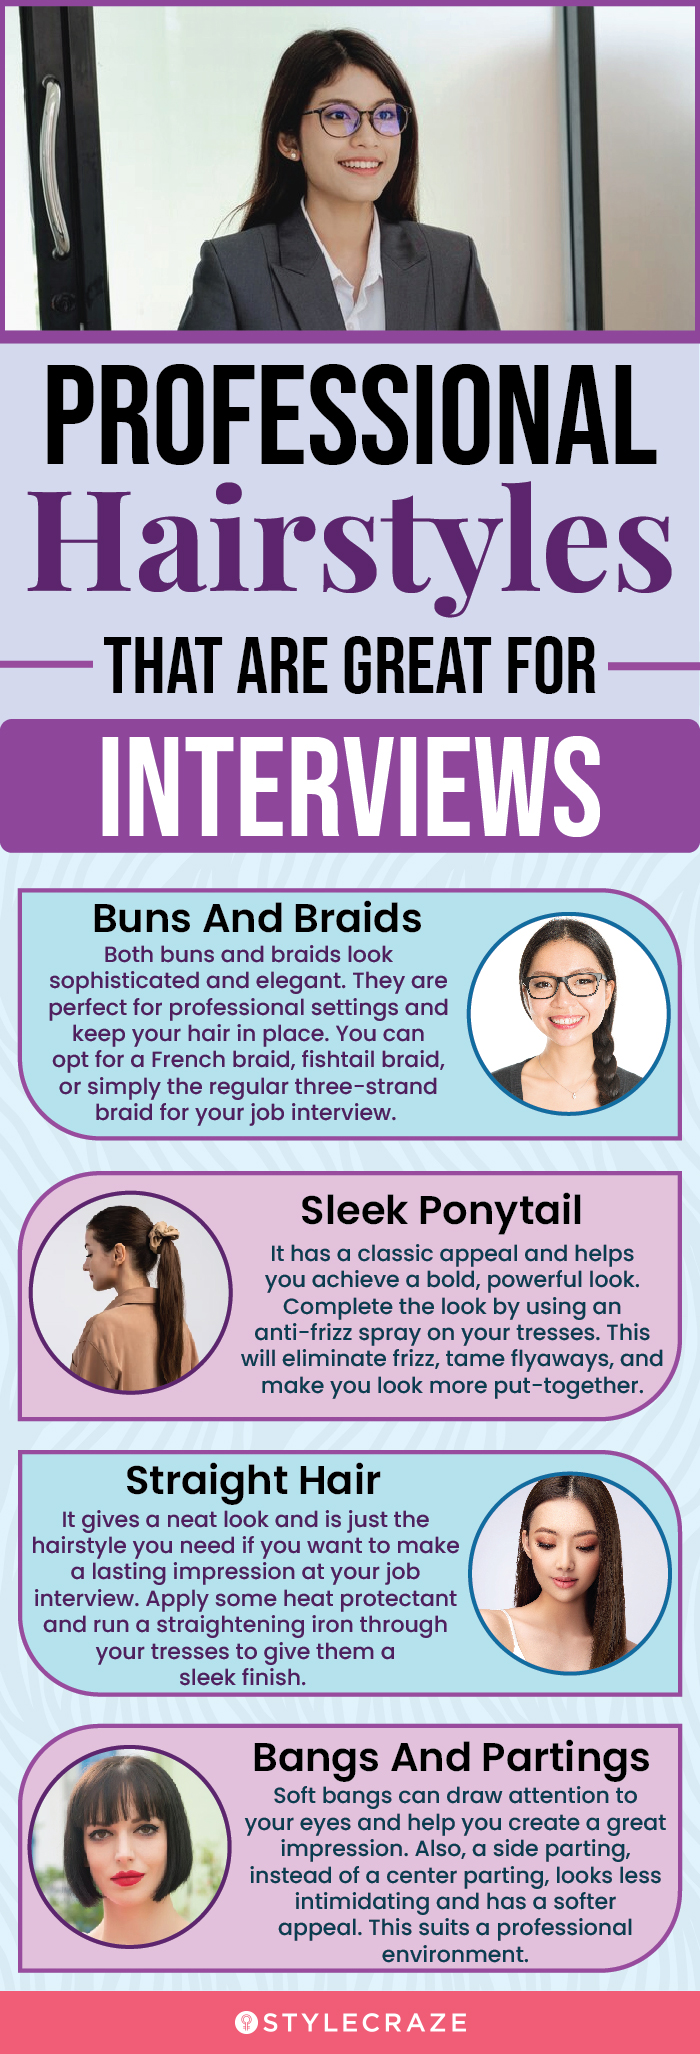 professional hairstyles that are great for interviews (infographic)